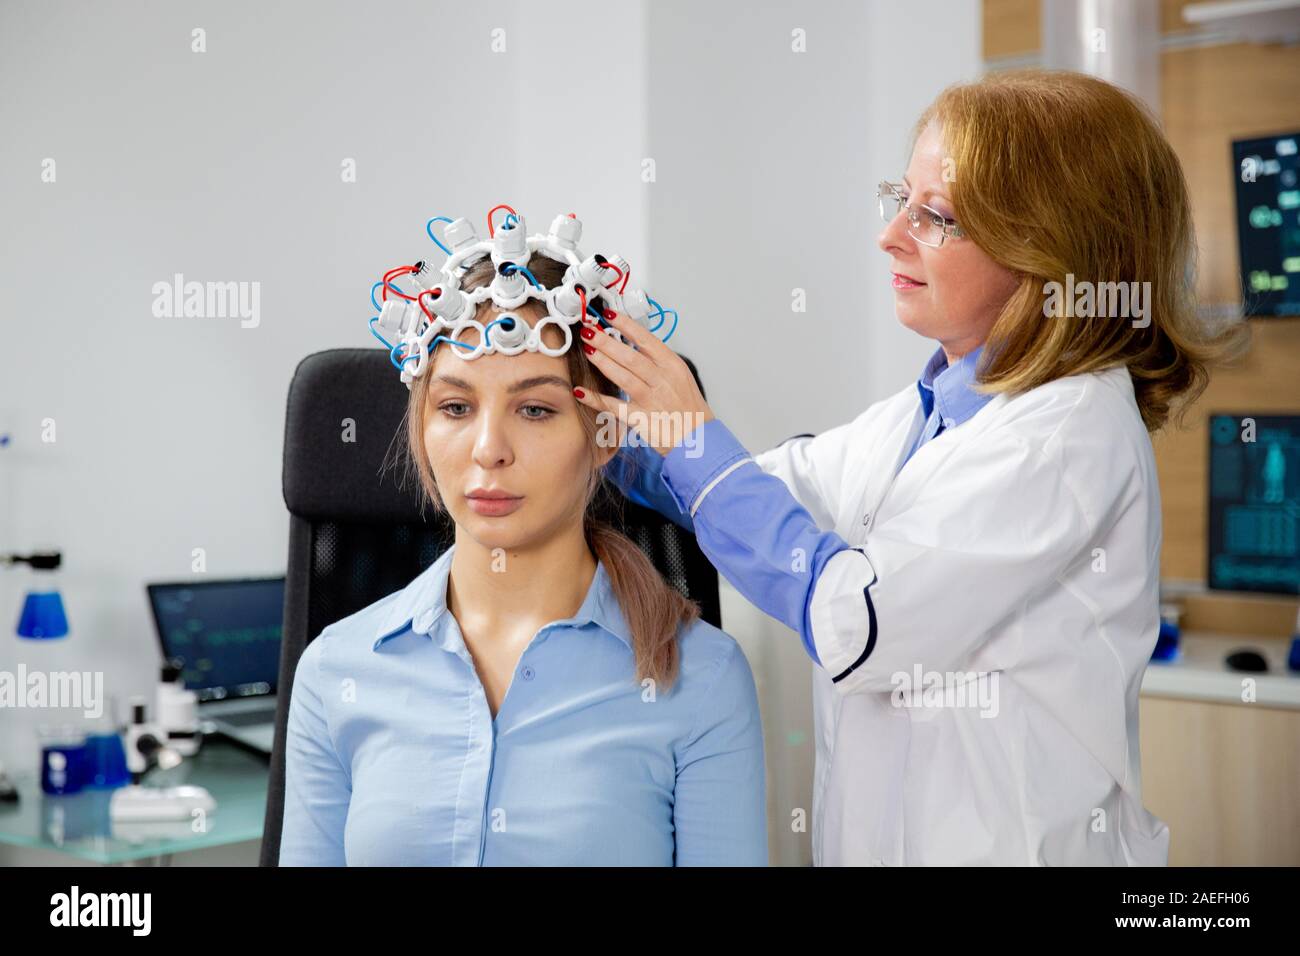 Female scientist who puts brain waves scanning helmet on a female patient. Modern divice and technology Stock Photo